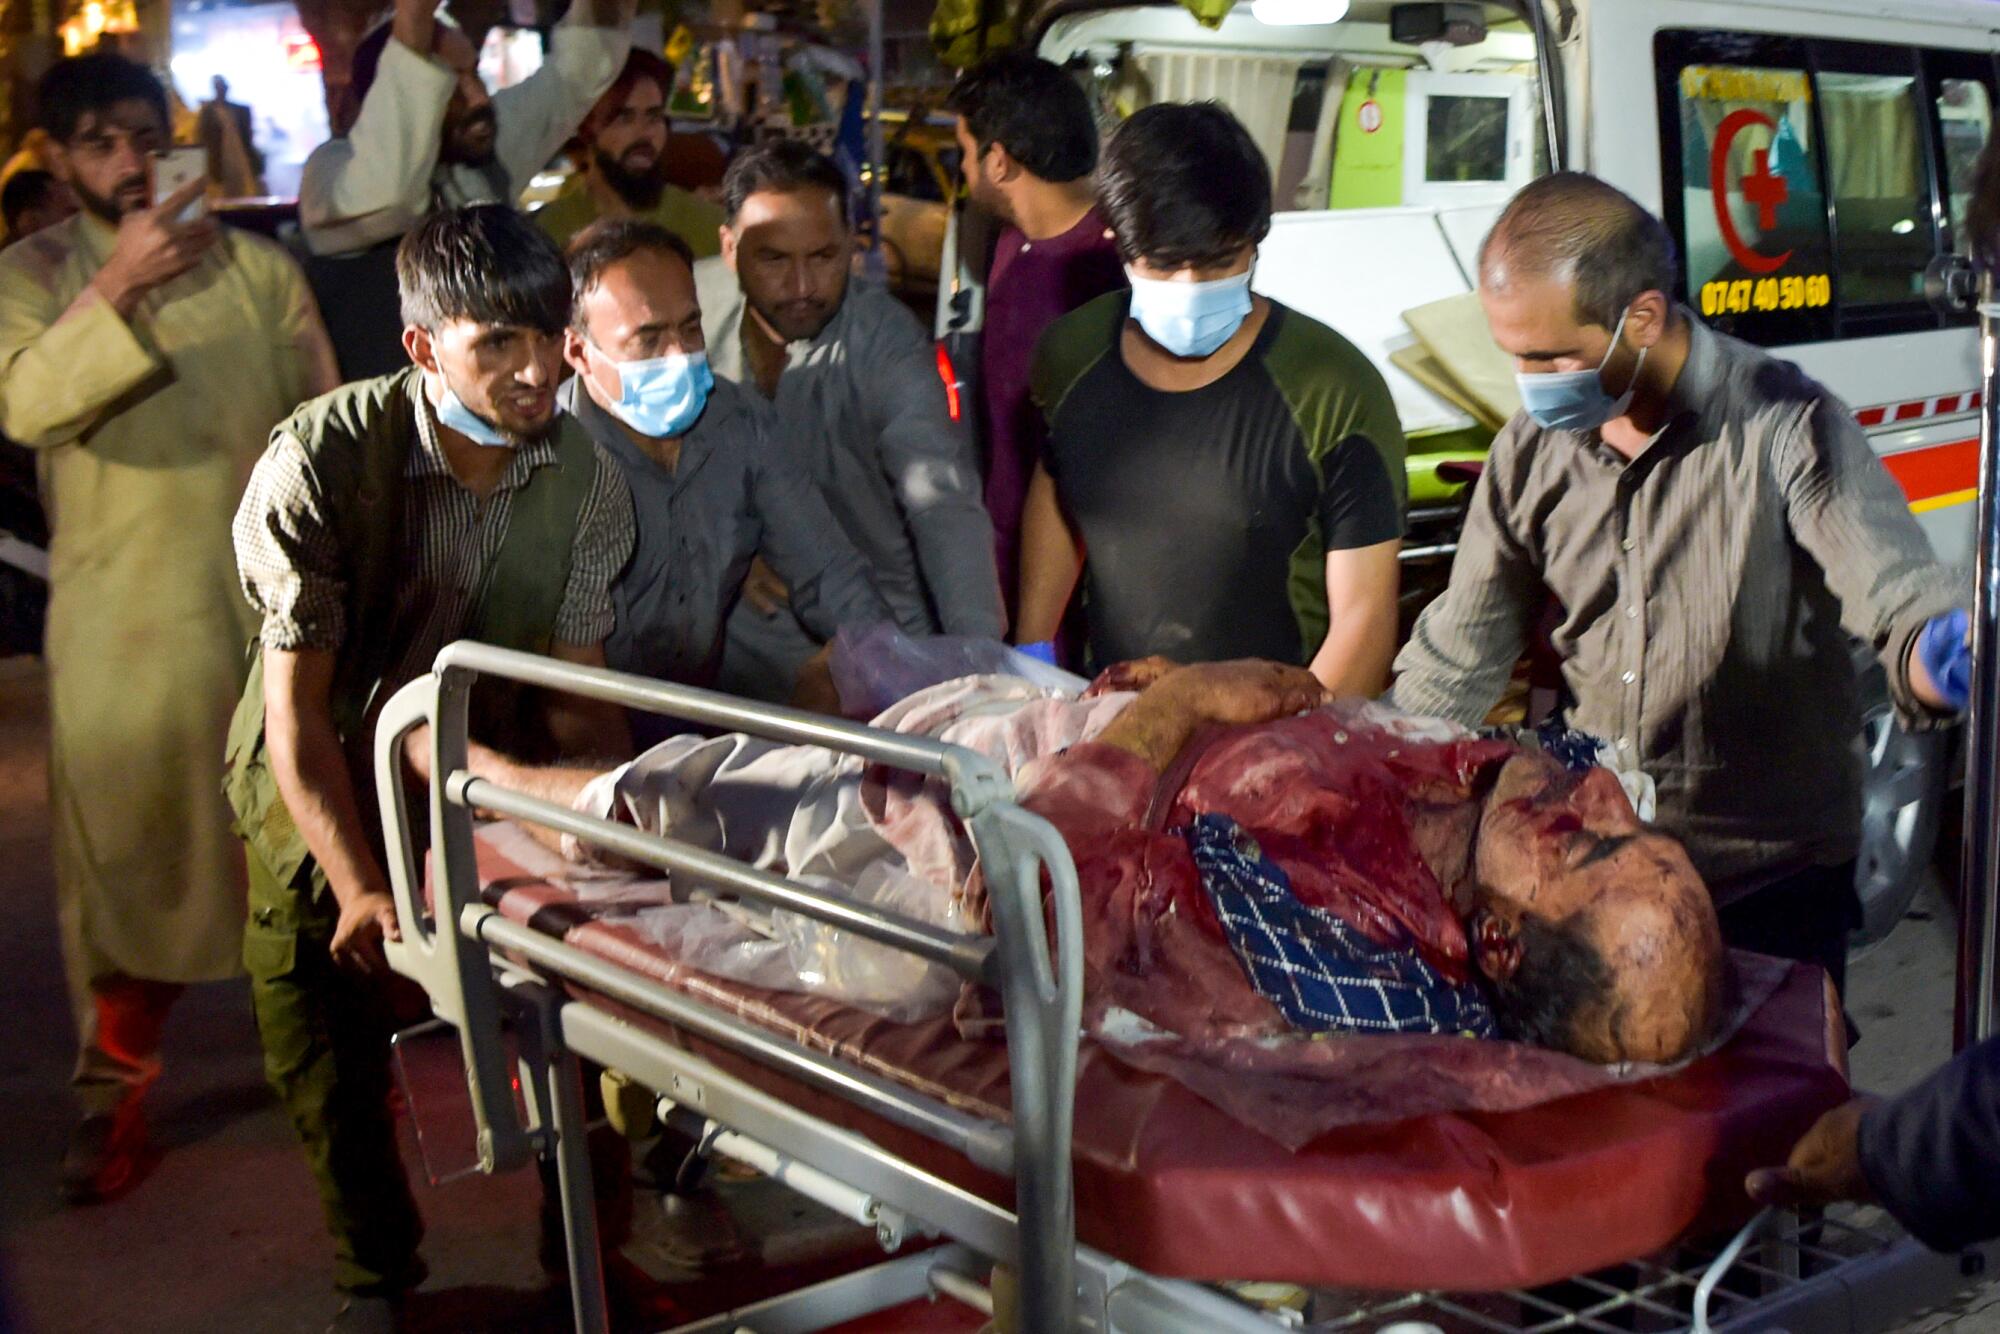 Volunteers and medical staff bring an injured man, whose body is bloodied, to the hospital for treatment.